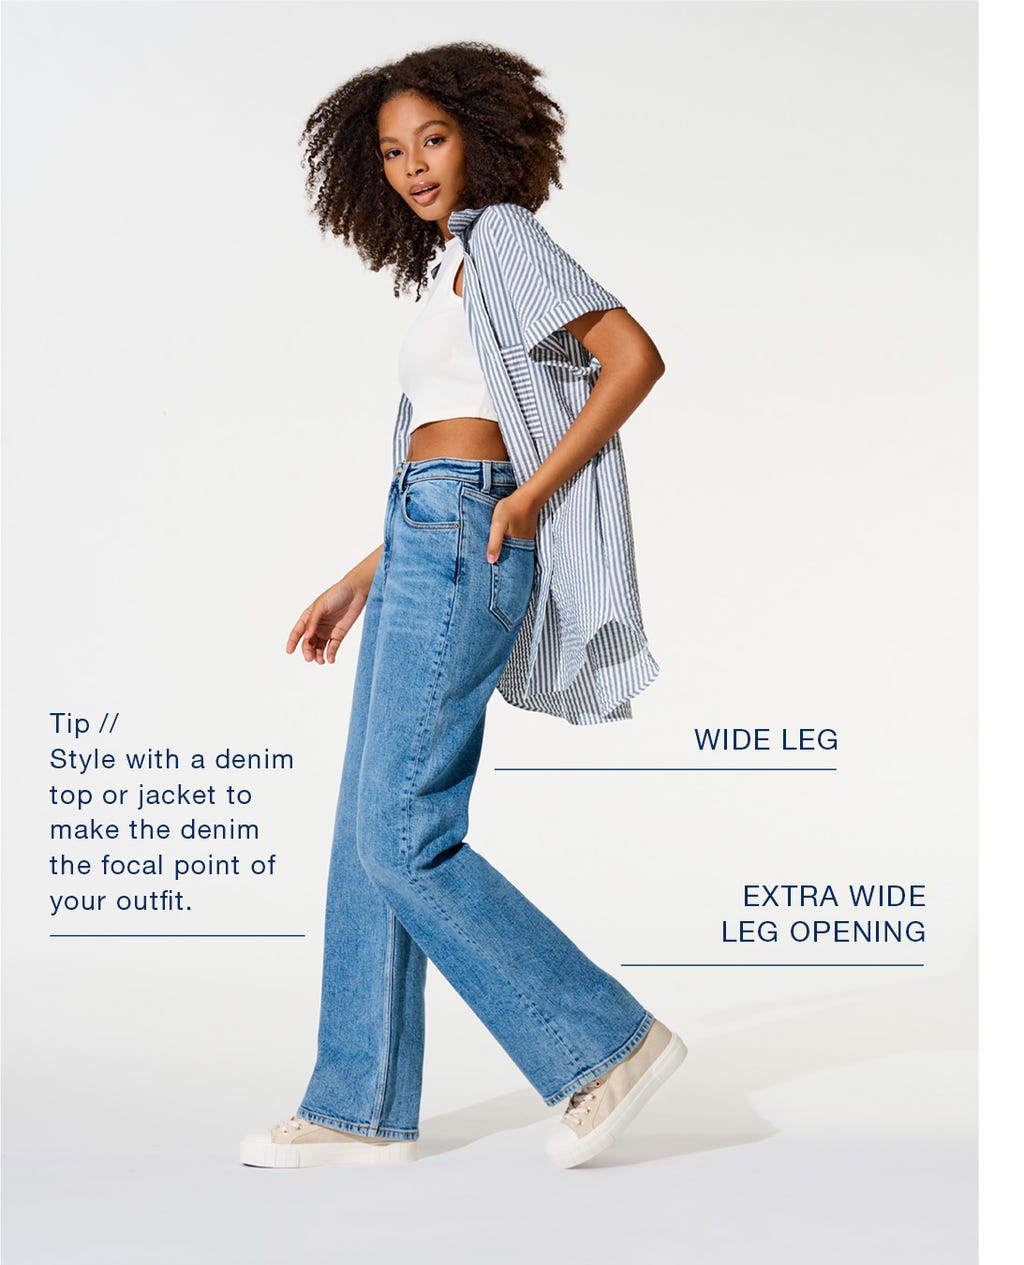 The jeans fit guide